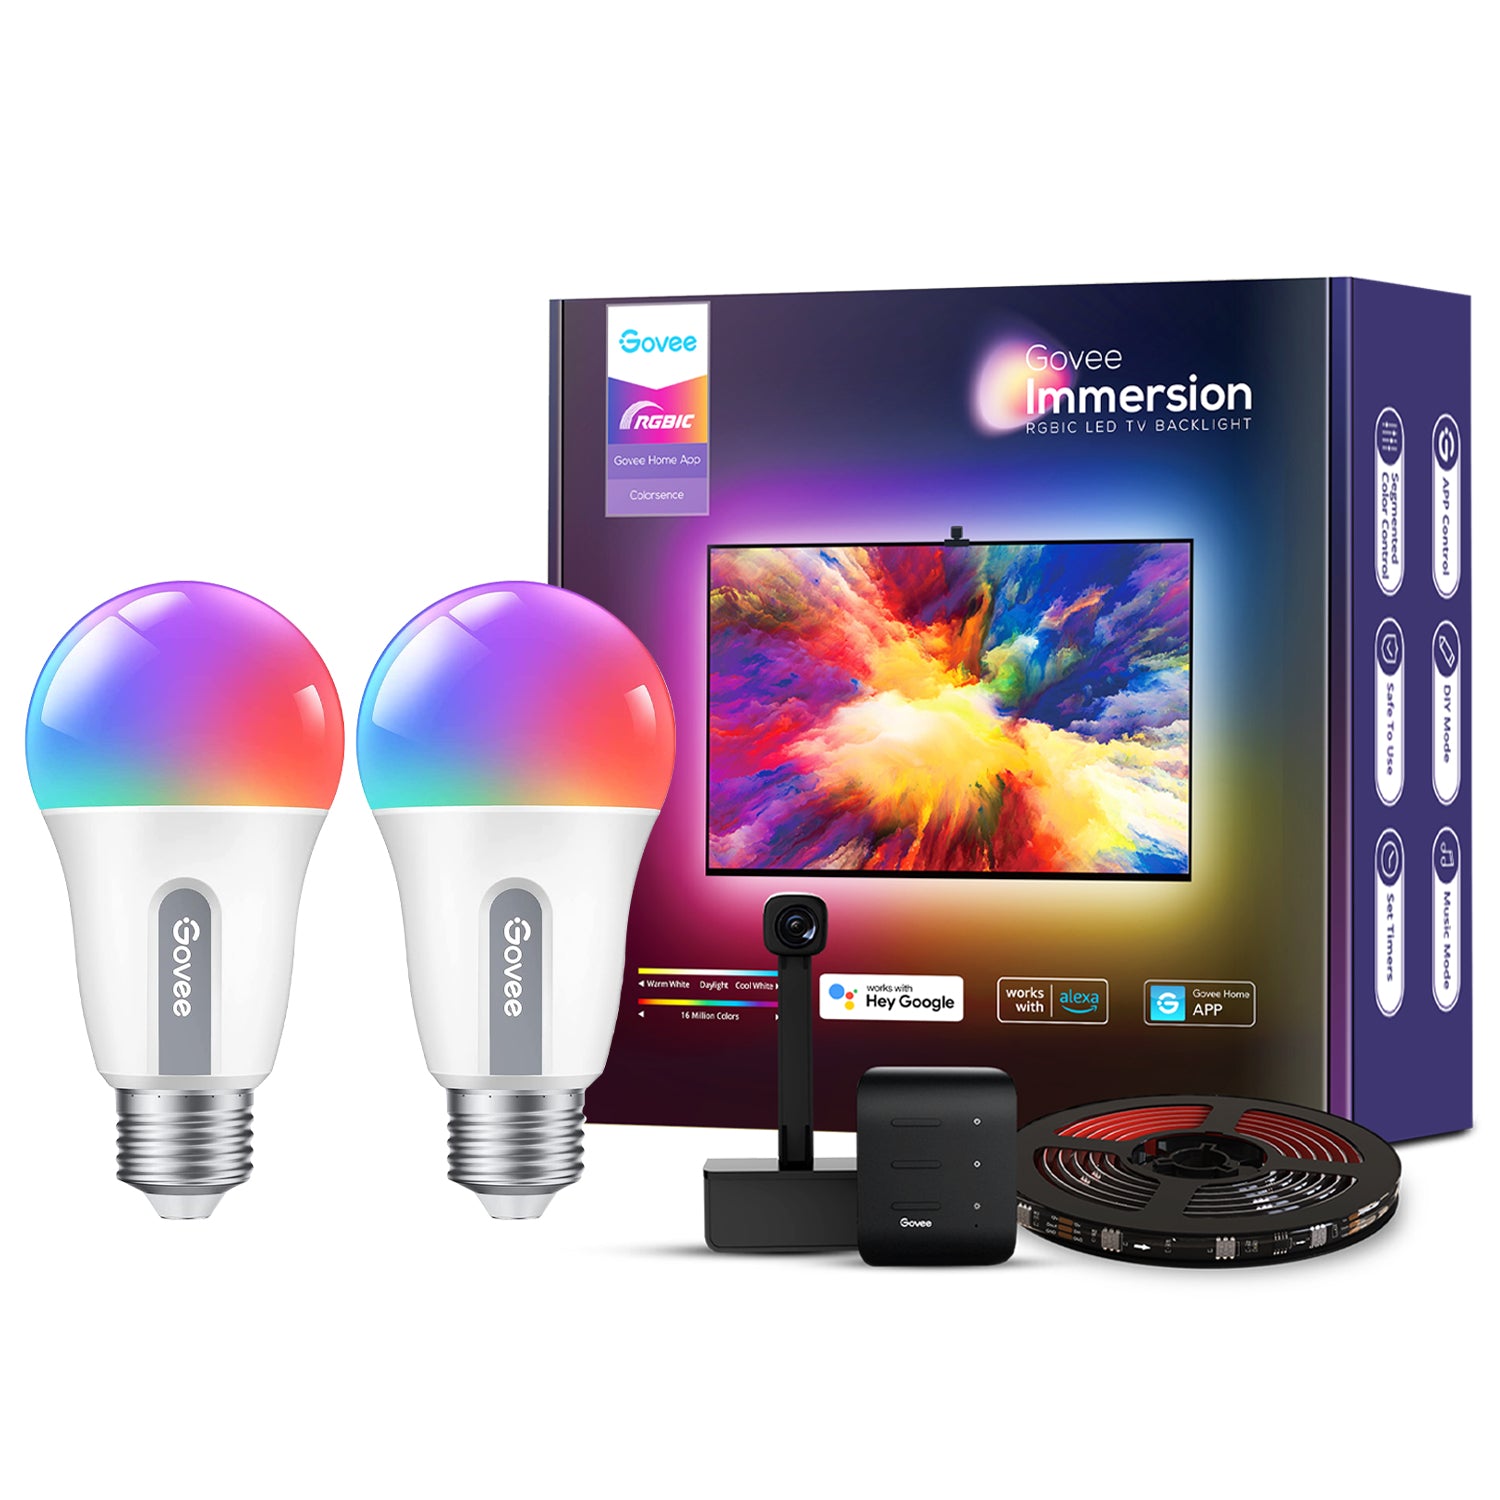 

Buy Immersion TV Backlights Get Free 2x LED Bulbs